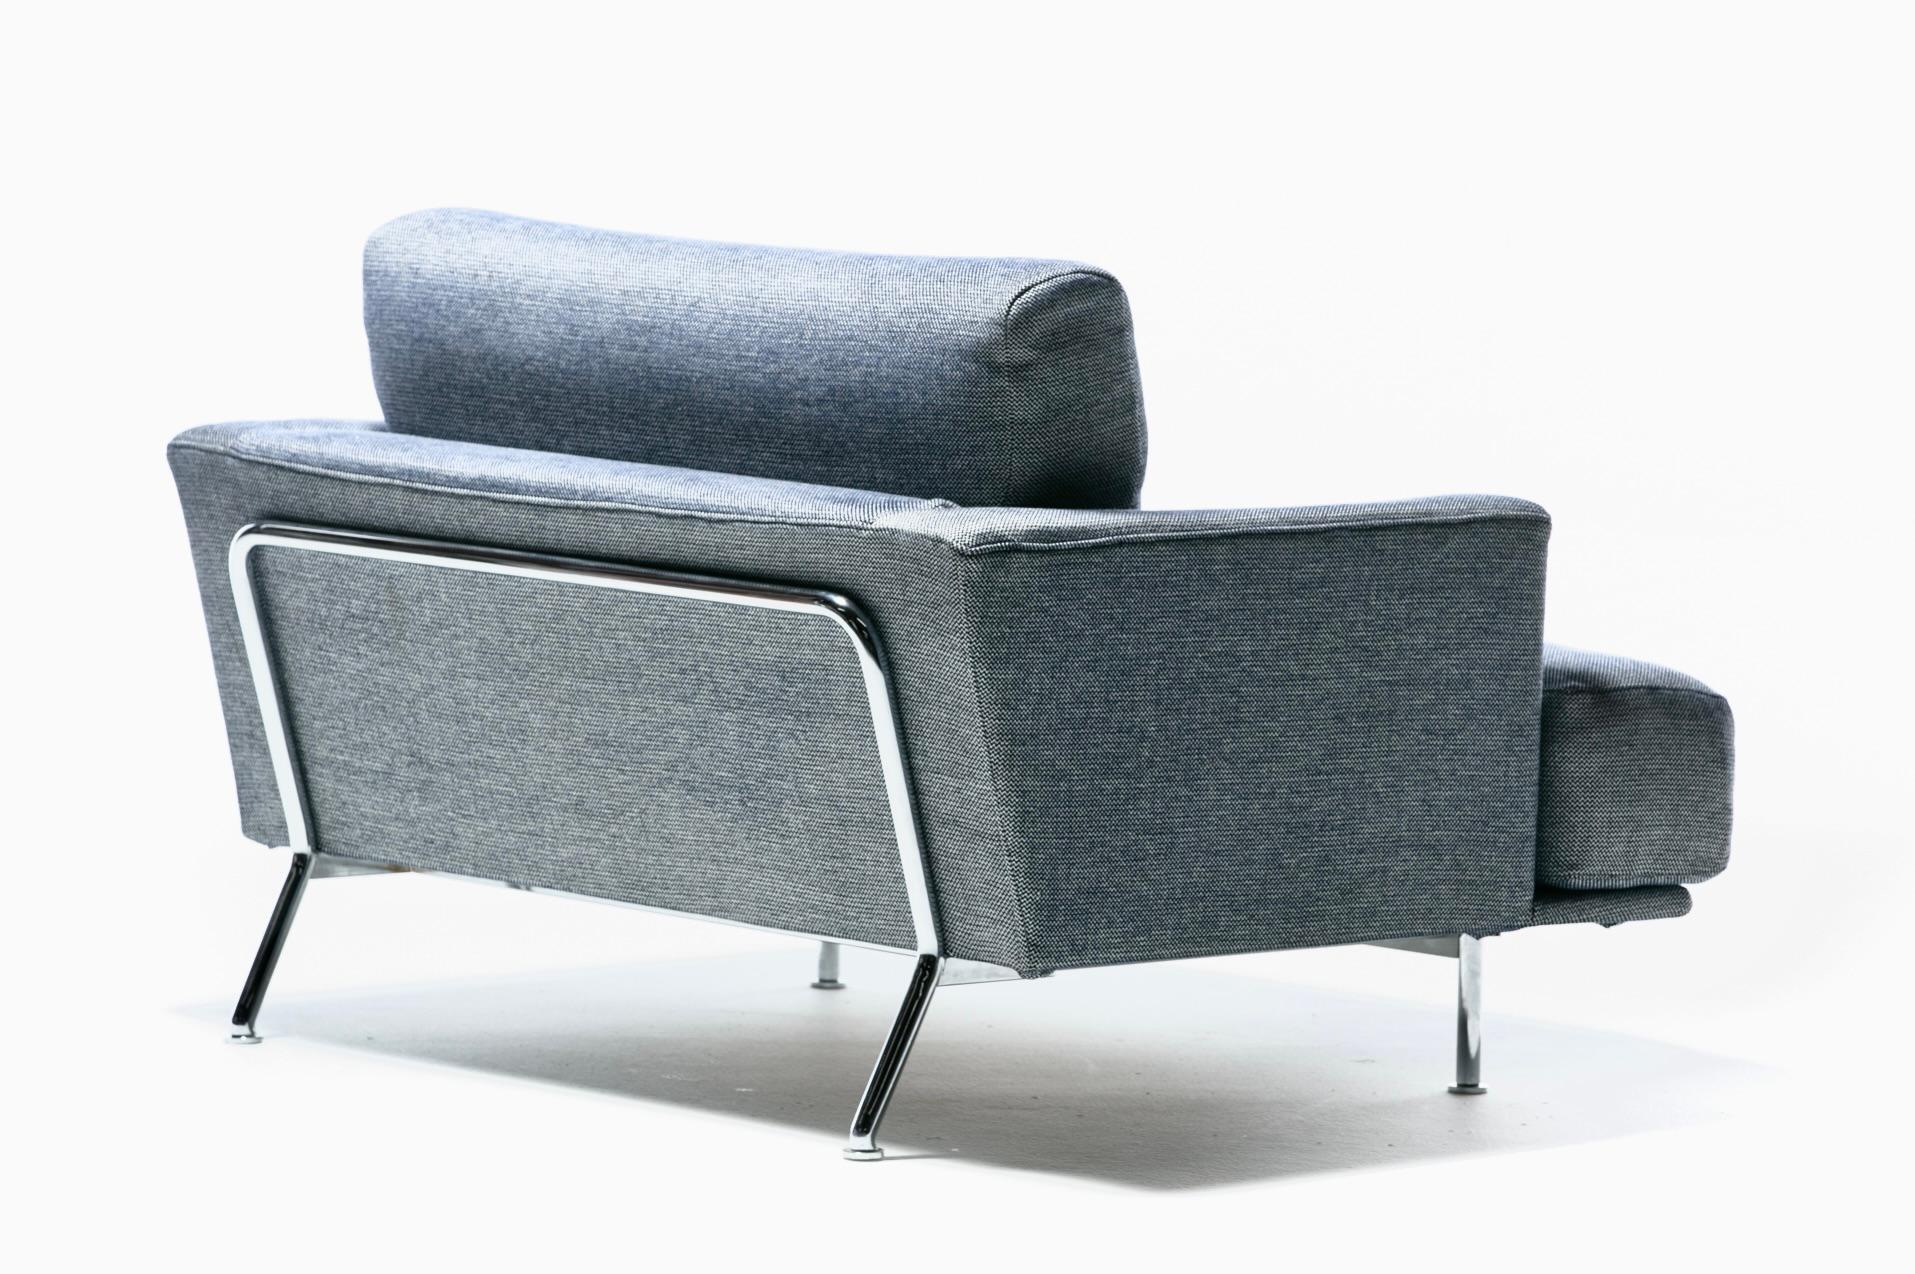 Pair of Imported Italian Modern Cassina 253 Nest Lounge Chairs by Piero Lissoni  4